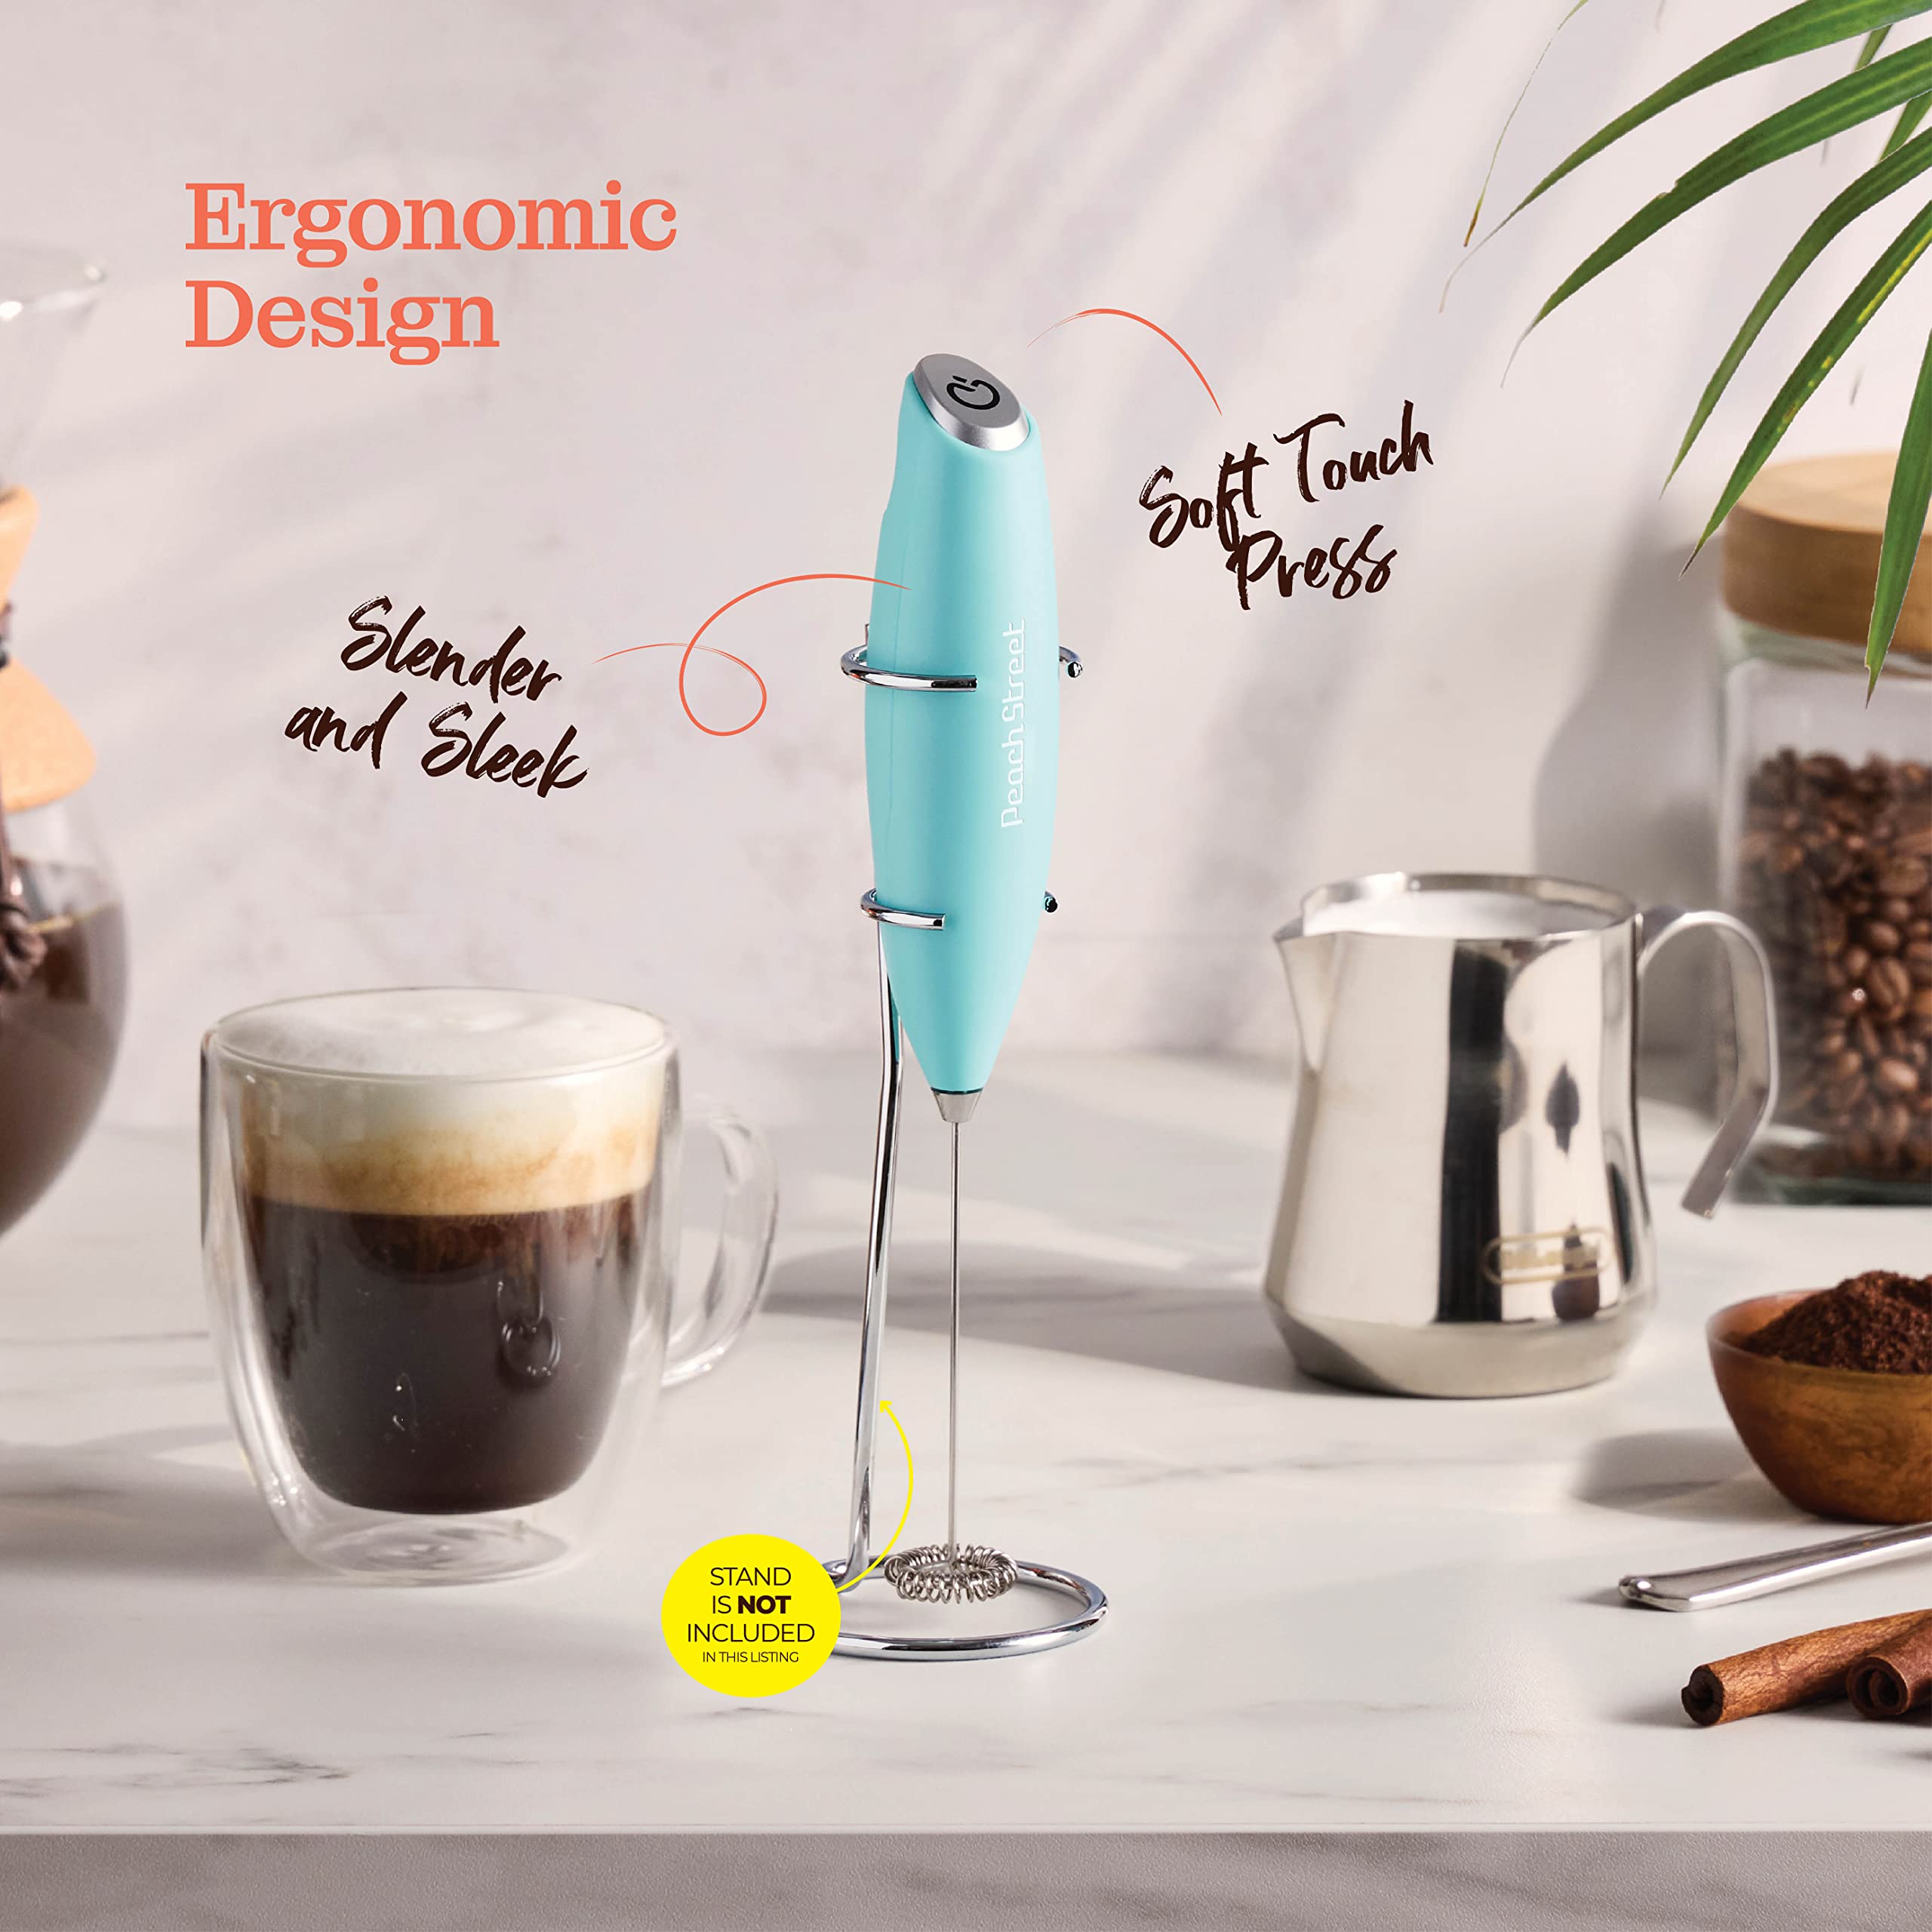 Powerful Handheld Milk Frother, Mini Milk Foamer, Battery Operated (Not included) Stainless Steel Drink Mixer for Coffee, Lattes, Cappuccino, Frappe, Matcha, Hot Chocolate.  - Like New